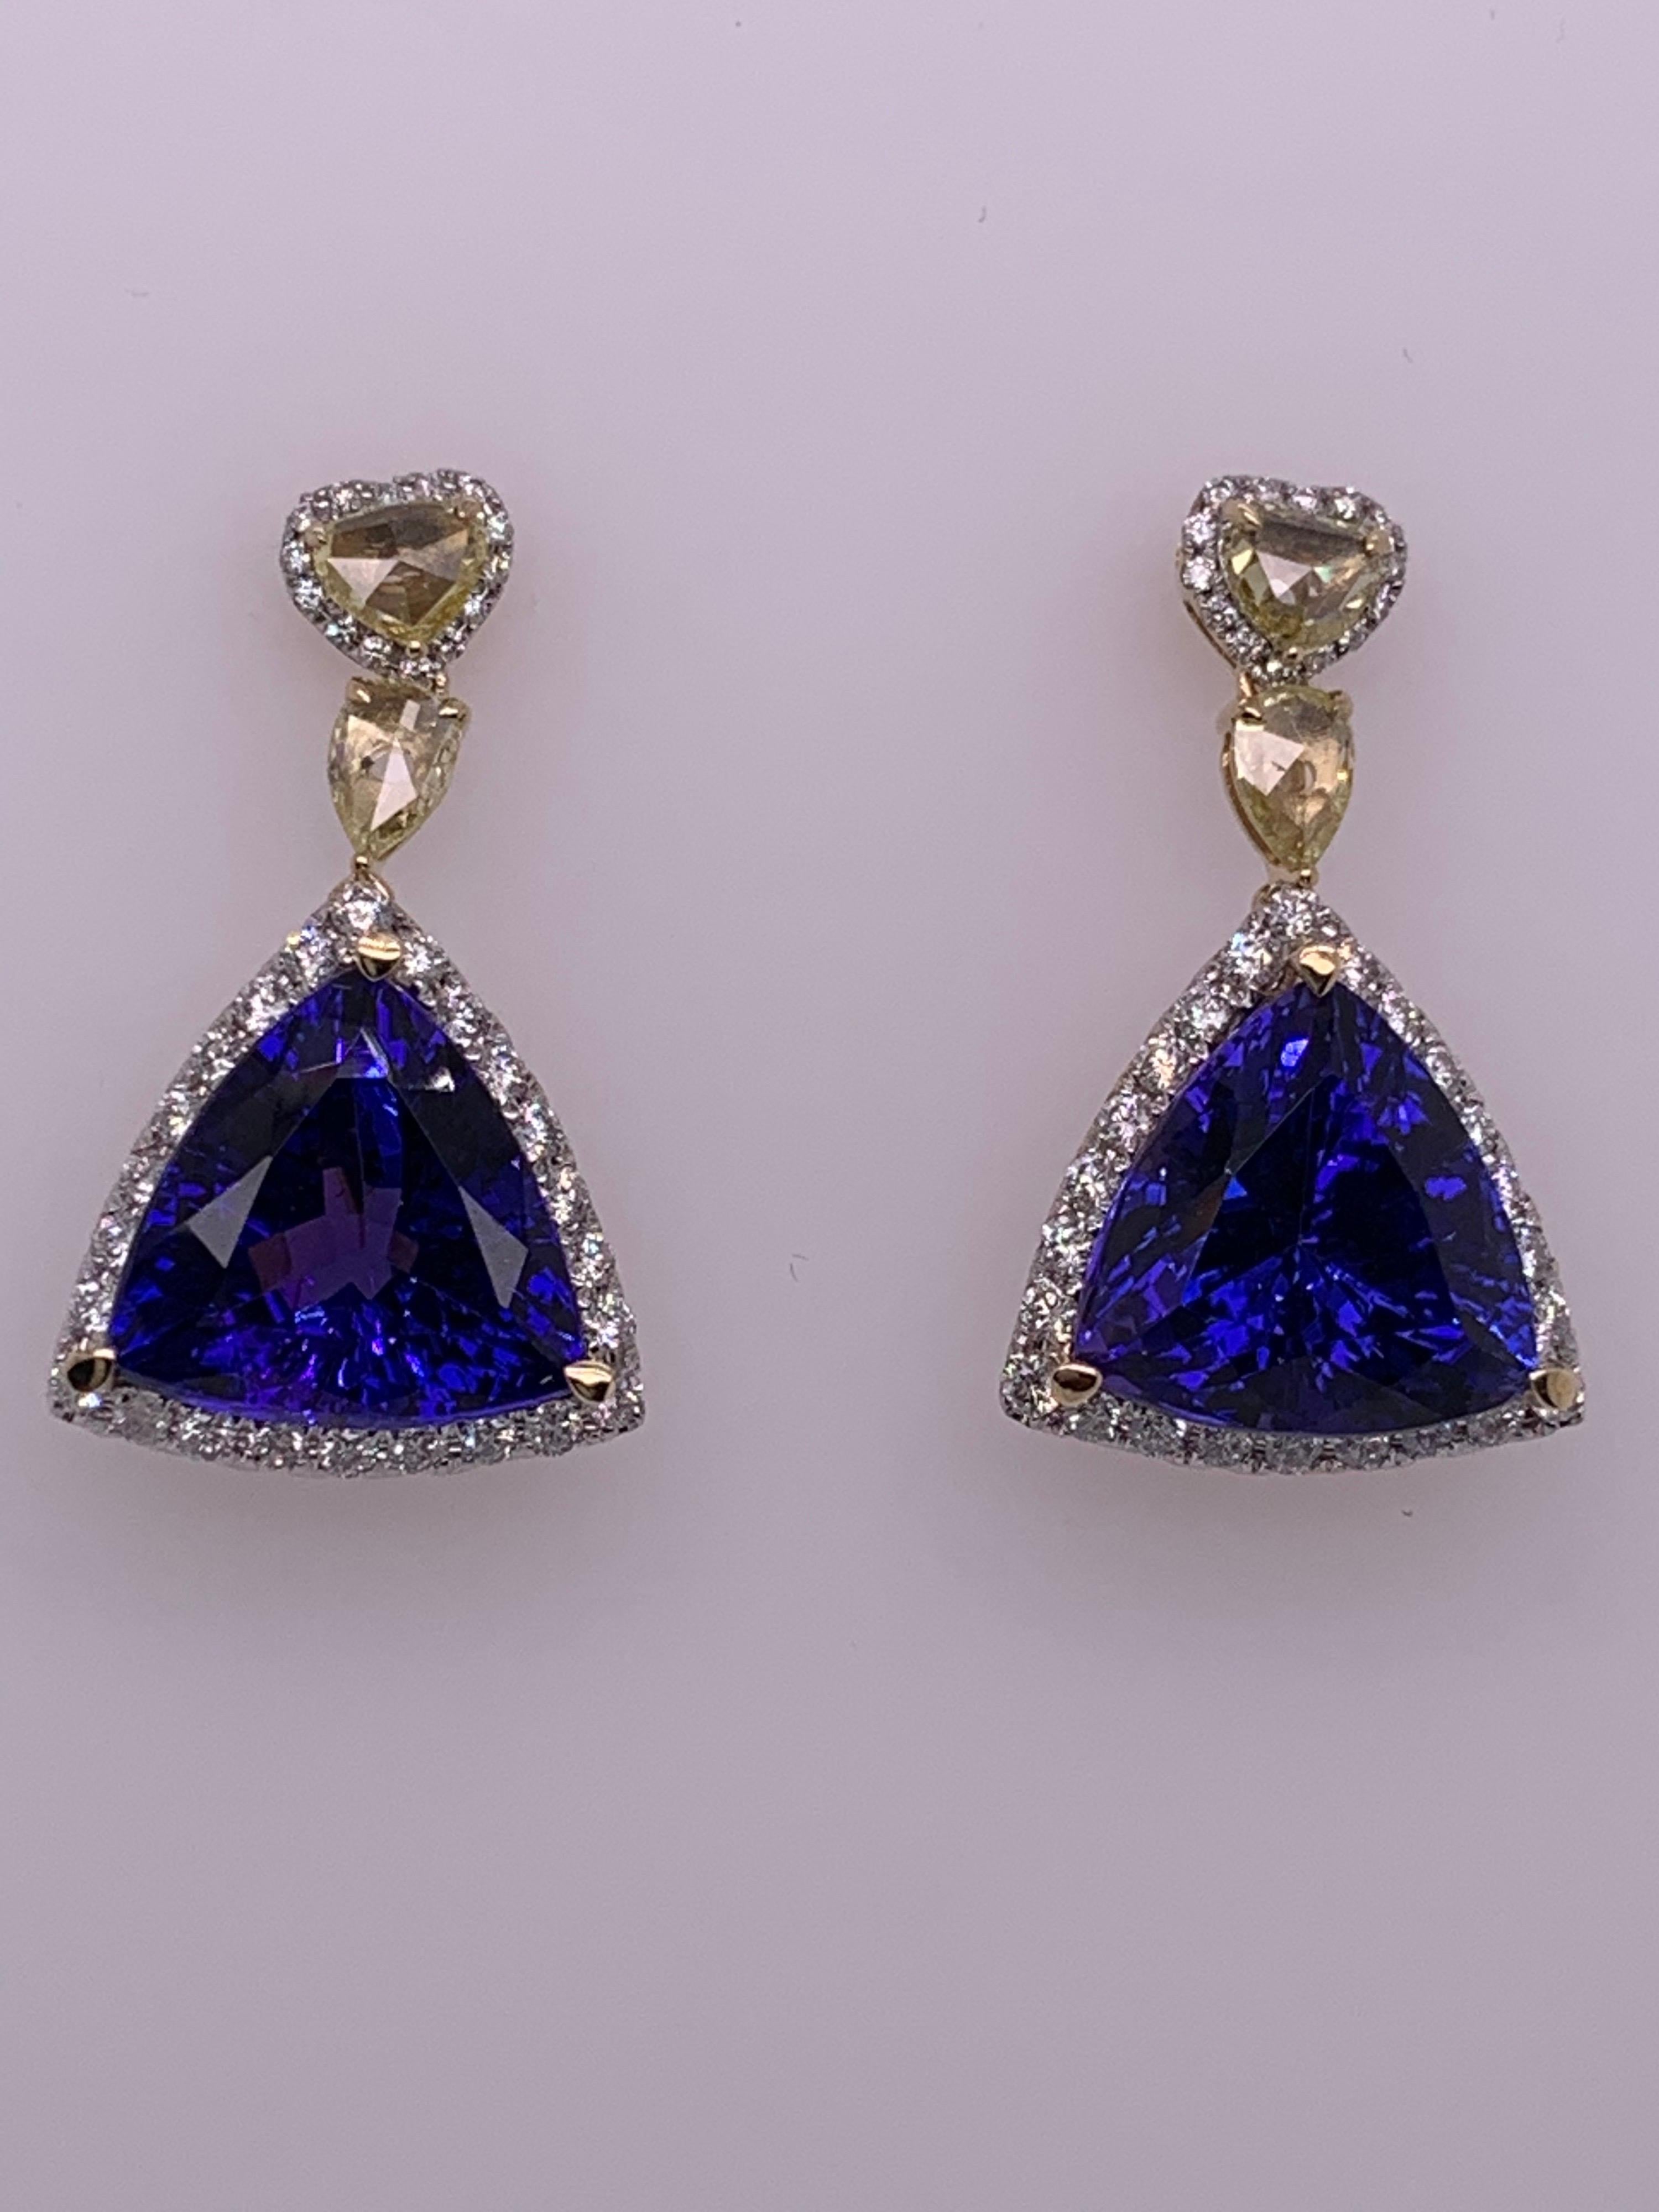 15.83 Carat Tanzanite Dangle Earrings with Yellow and White Diamond For Sale 2